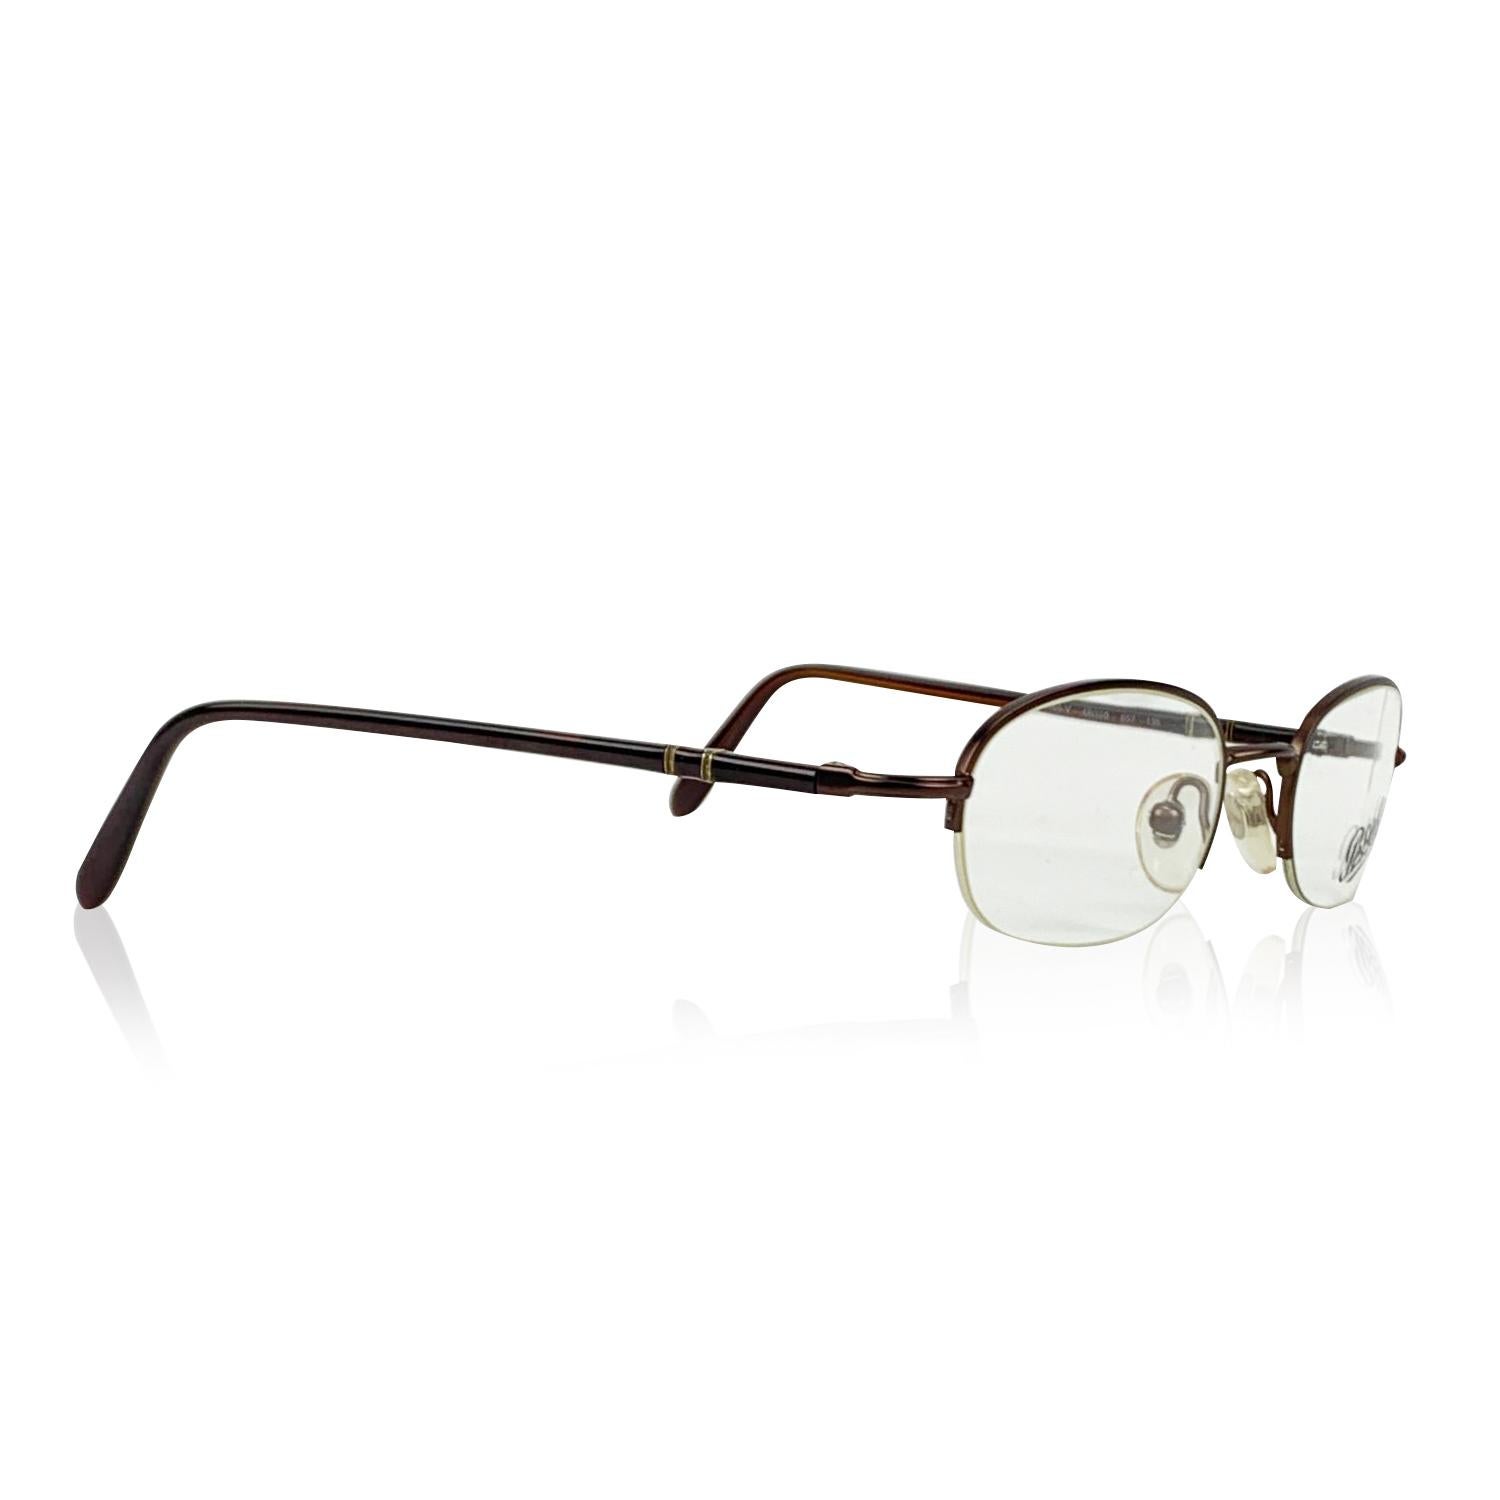 PERSOL Vintage Eyeglasses- Model: 2065V. Half Rim design- Brown metal frame. Clear demo lenses. Meflecto System on arms (2 metal pins which are inserted vertically into the ear stems and provide flexibility in the stems). Made in Italy. Style &